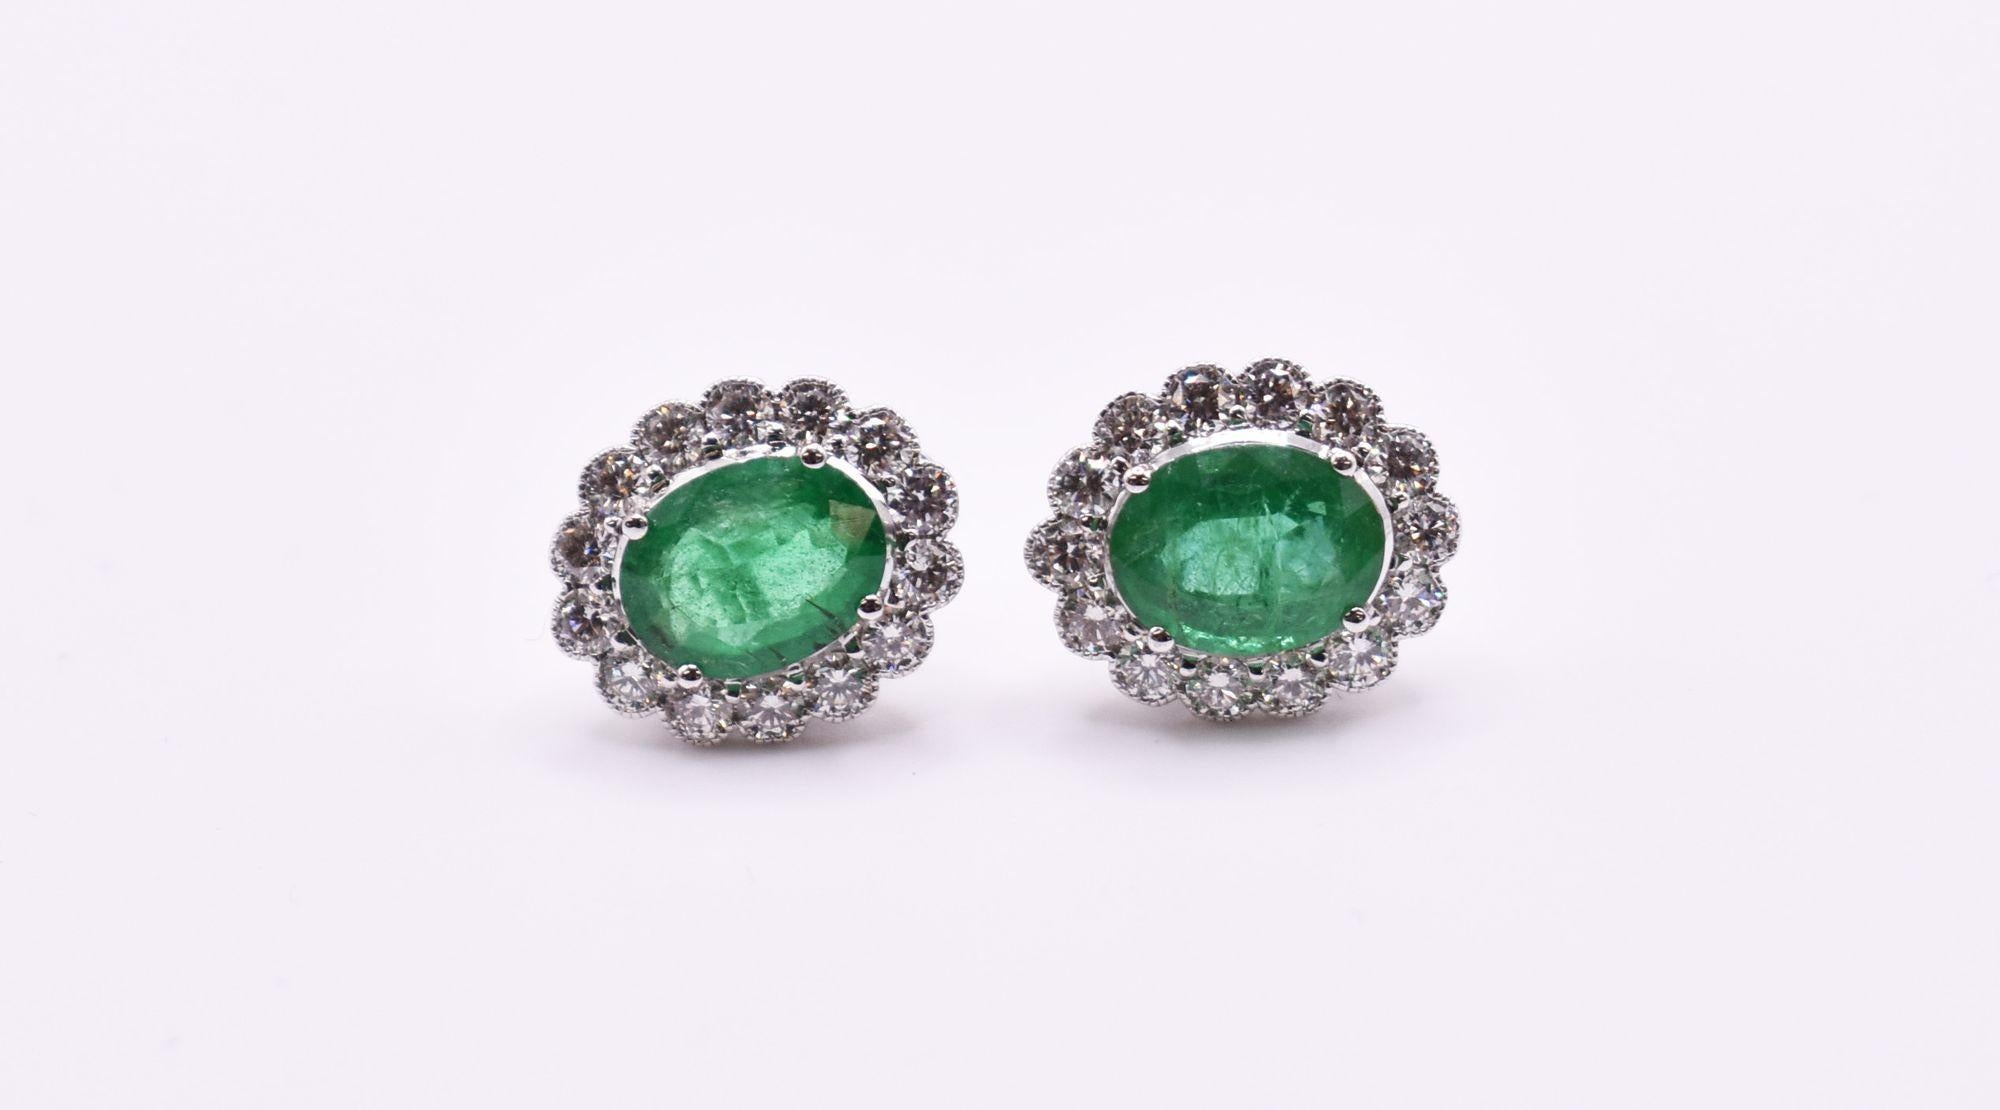 A fabulous pair of 18k white gold emerald and diamond earrings, having a claw set emerald of very nice colour and decent quality emerald which weighs 3.23 ct, each having 14 miligrain set diamonds.

Emerald: 3.23ct
Diamond: 1.26ct
Gold: 4.84g

RRP: